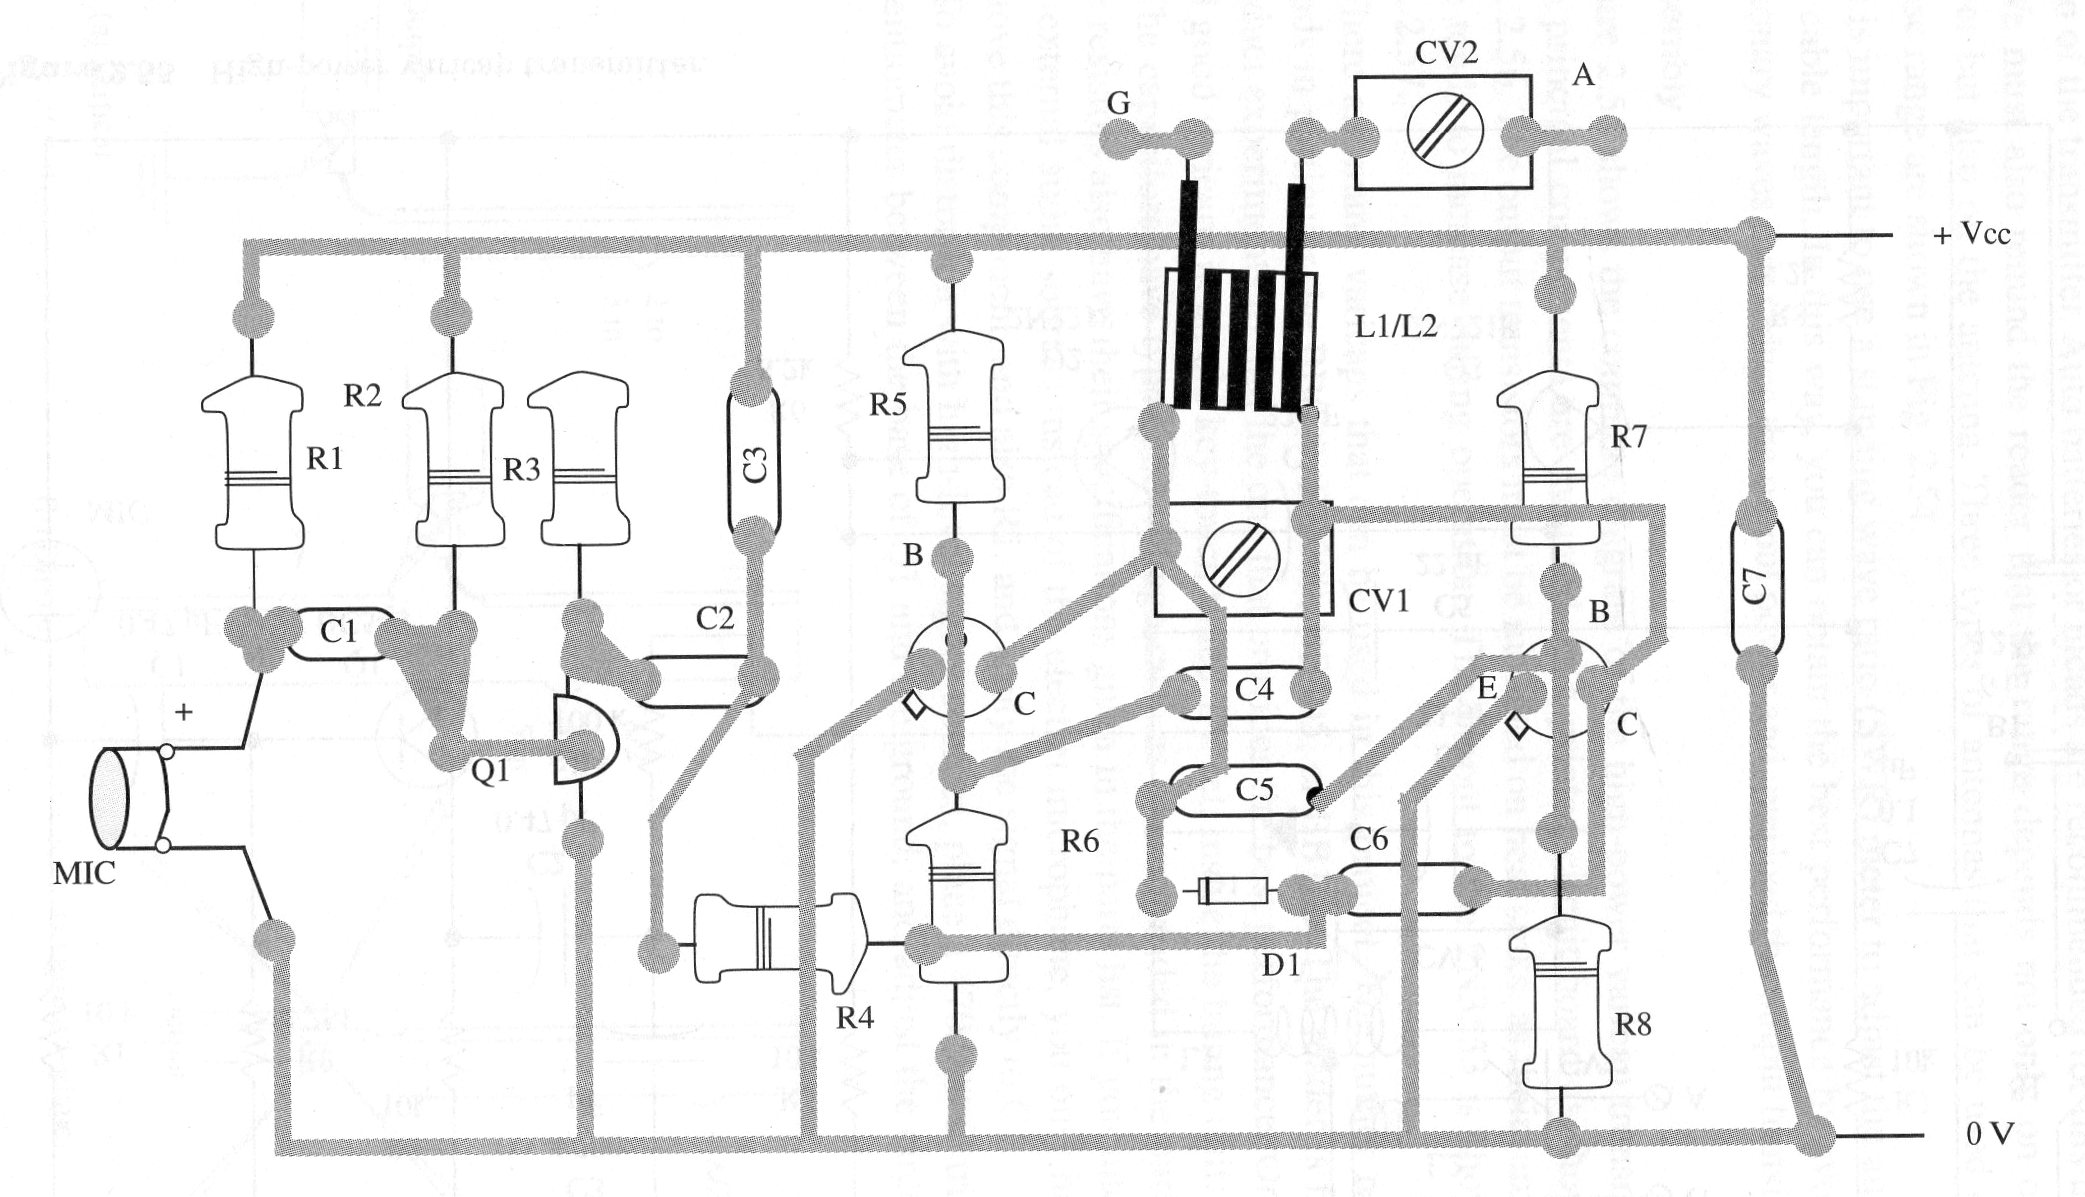 Figure 6 – Printed circuit board for the project